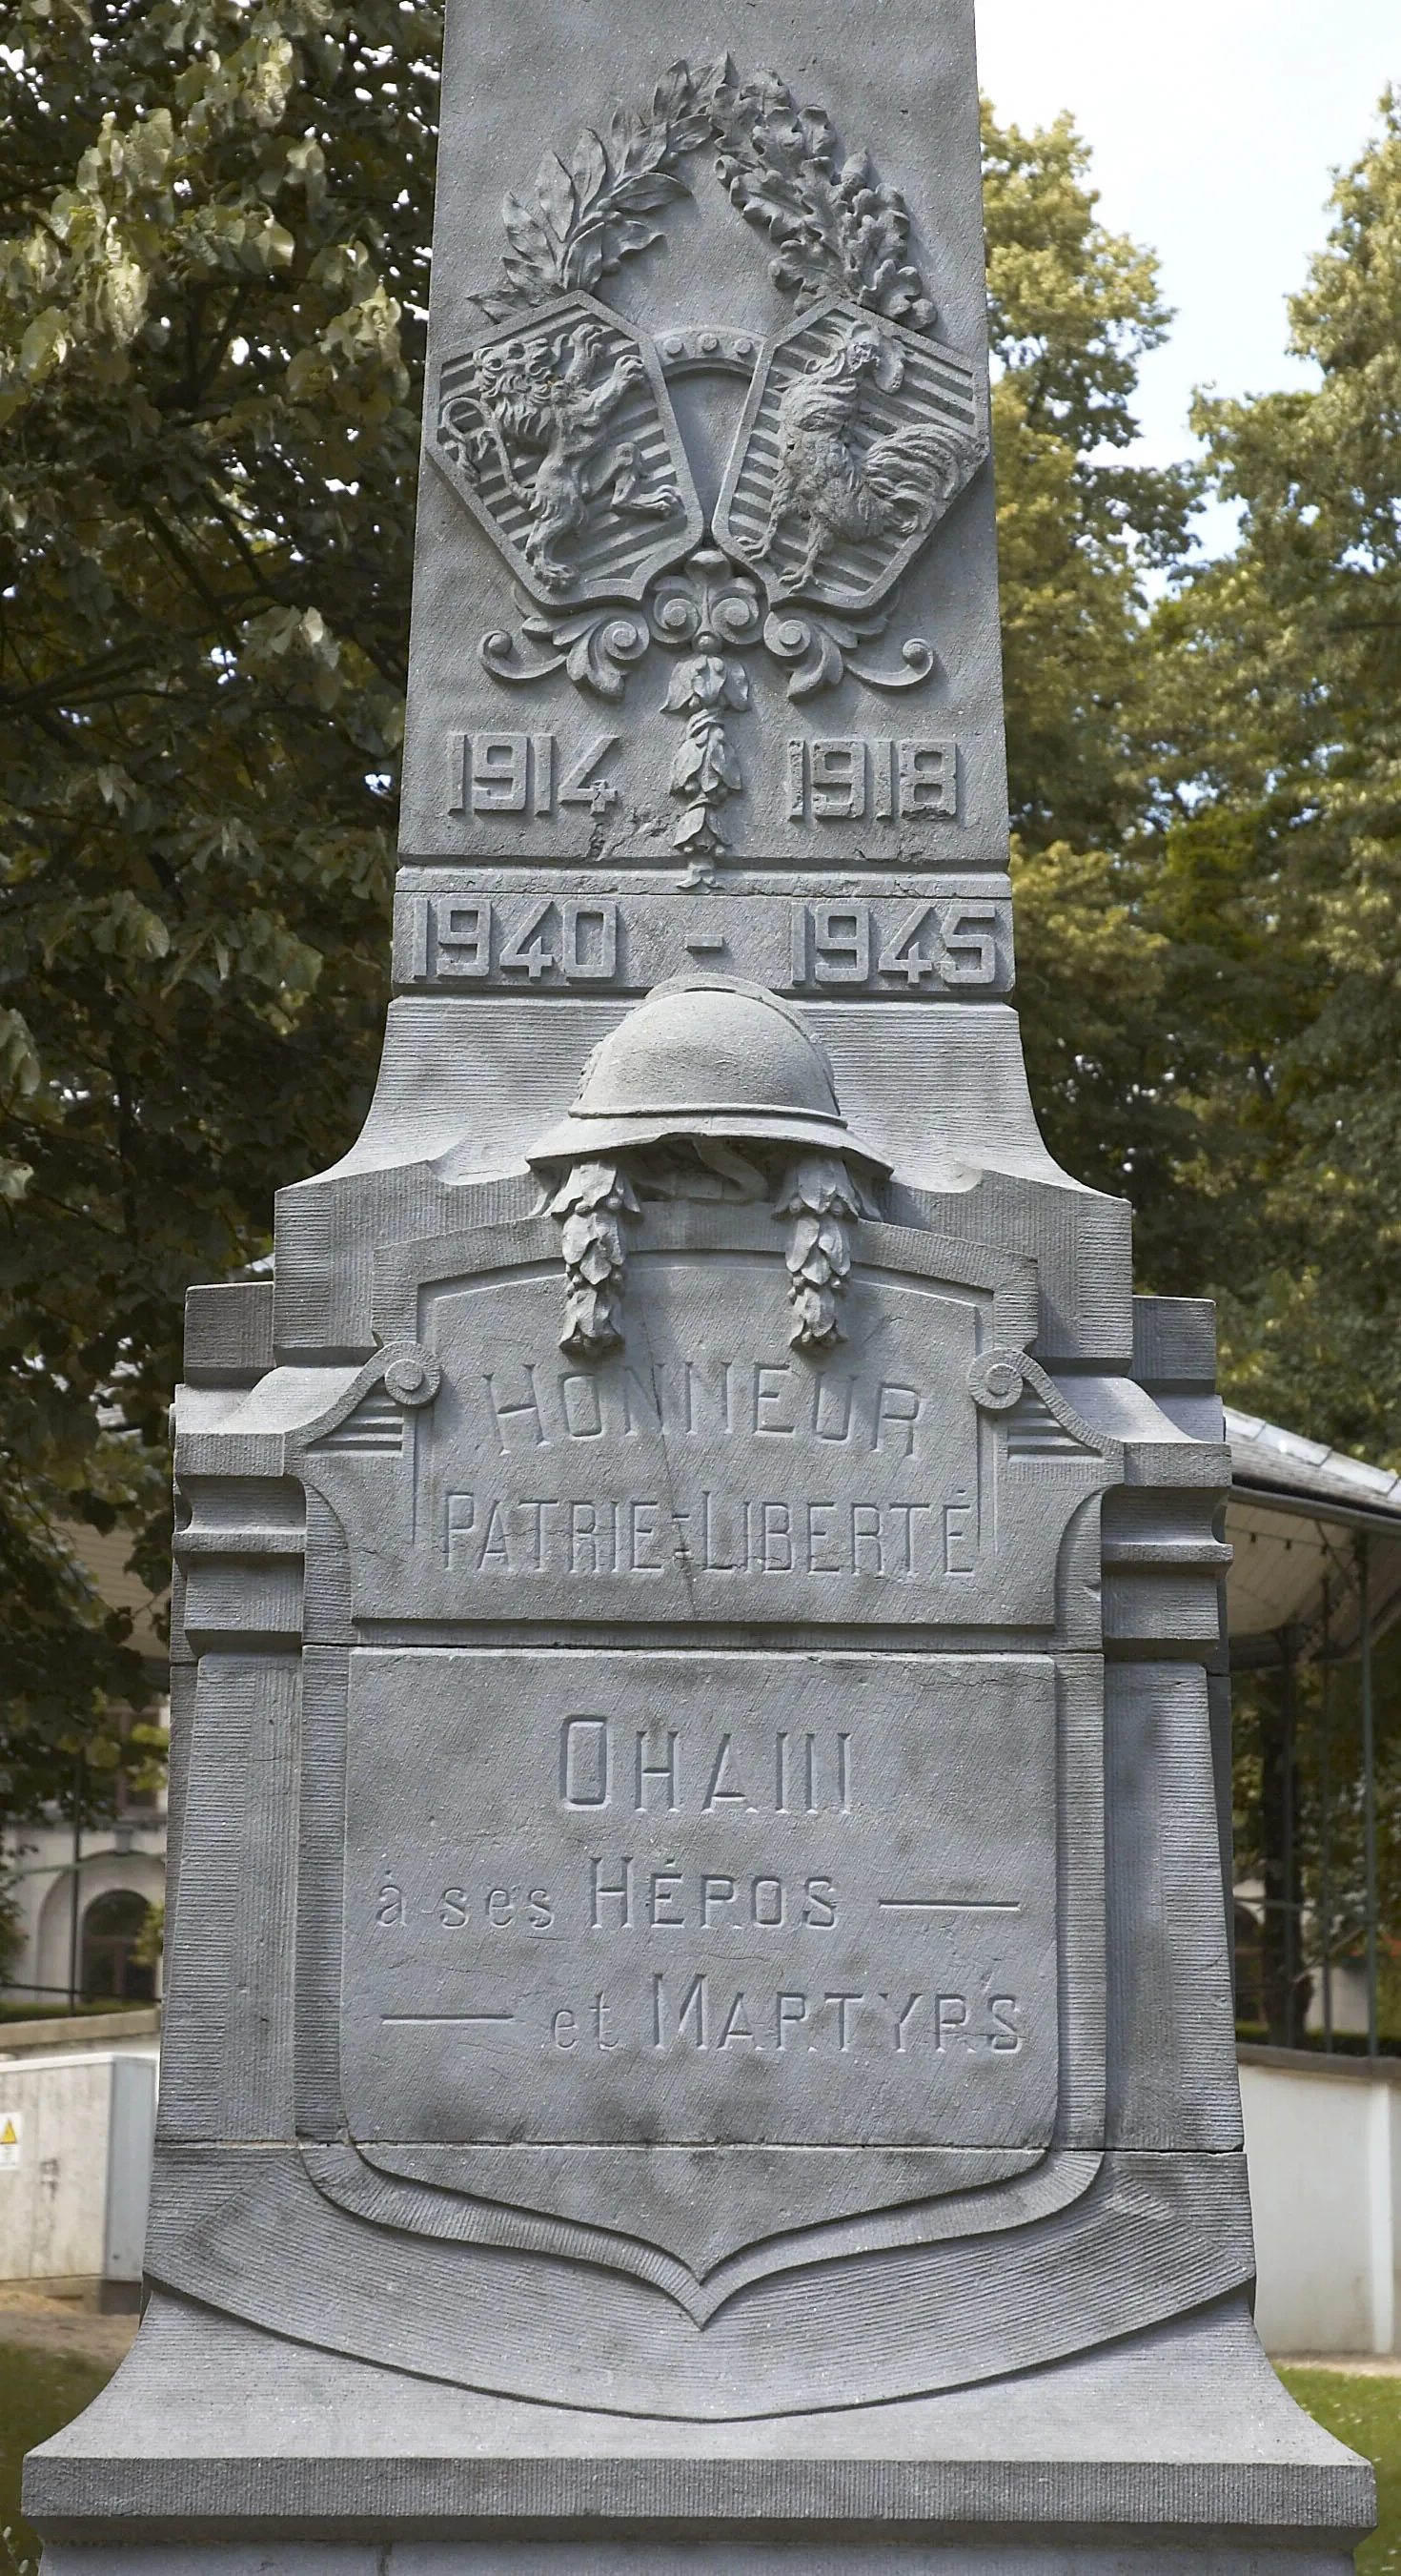 Photo showing: War monument (1914-1918 and 1940-1945) in Place communale in Ohain (part of Lasne) in Belgium. The text reads "honneur patrie liberté Ohain à ses Héros et Martyrs"